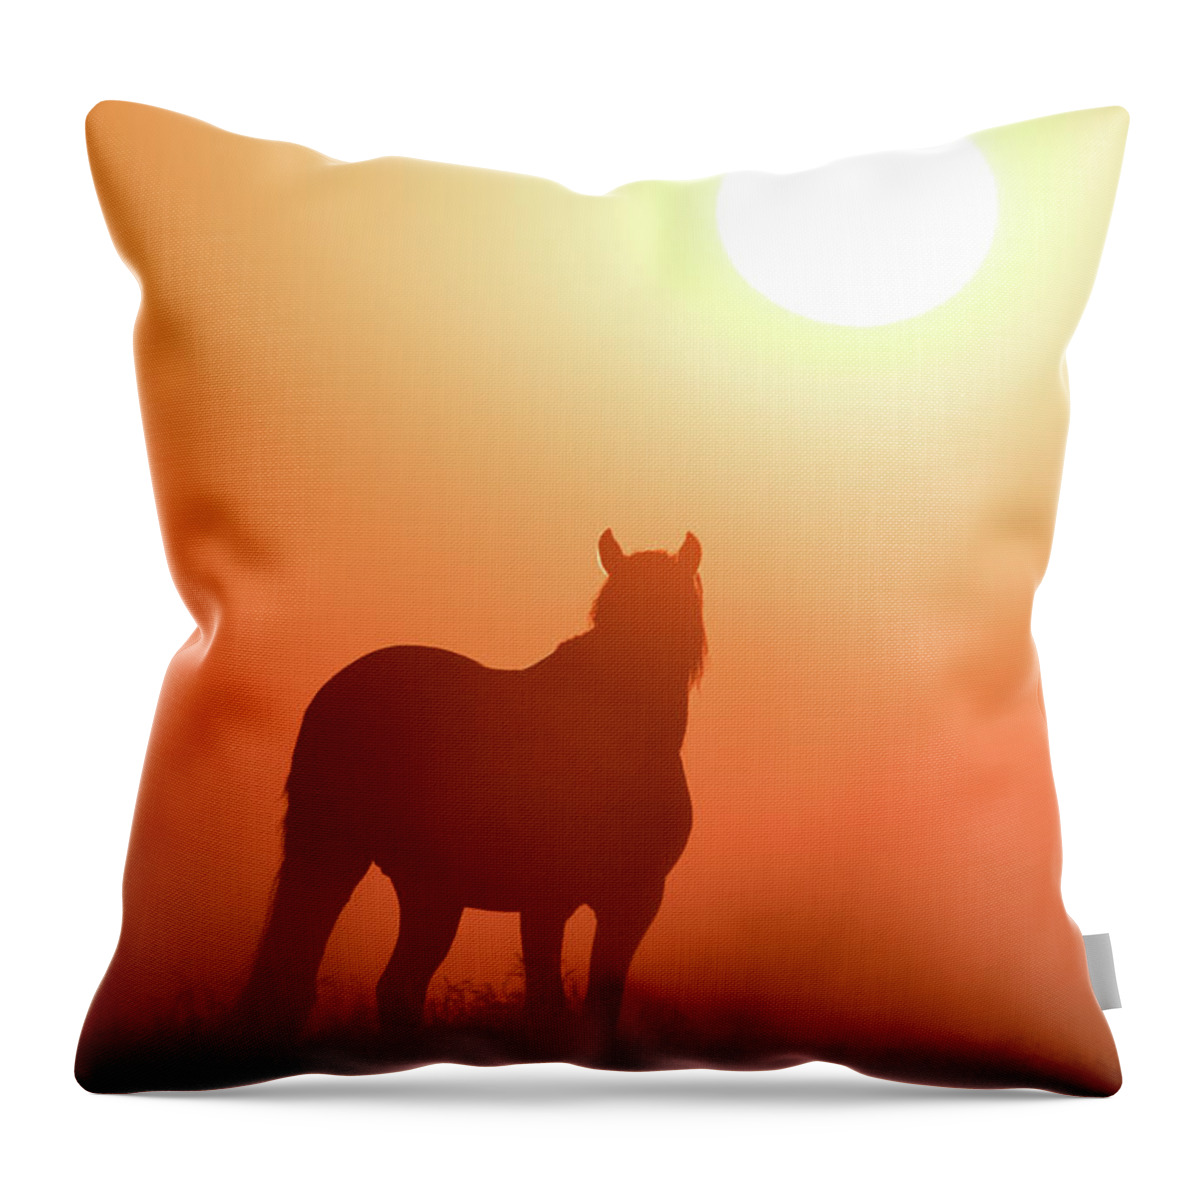 Silhouette Throw Pillow featuring the photograph Horse Silhouette by Wesley Aston